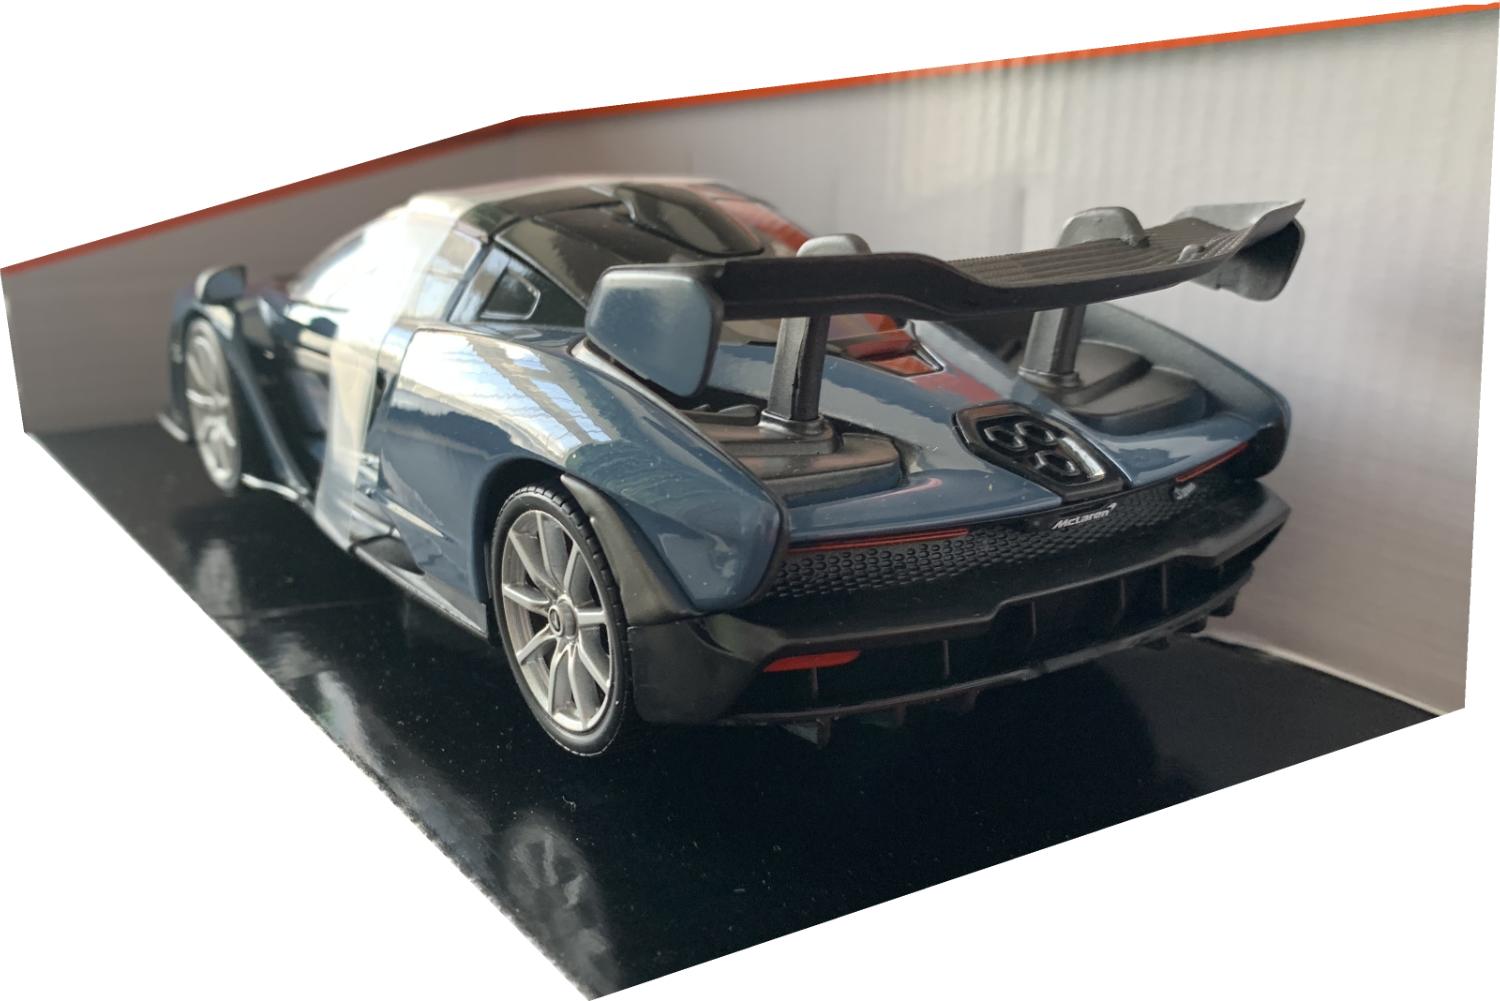 McLaren Senna vision victory grey 1:24 scale model from Motormax